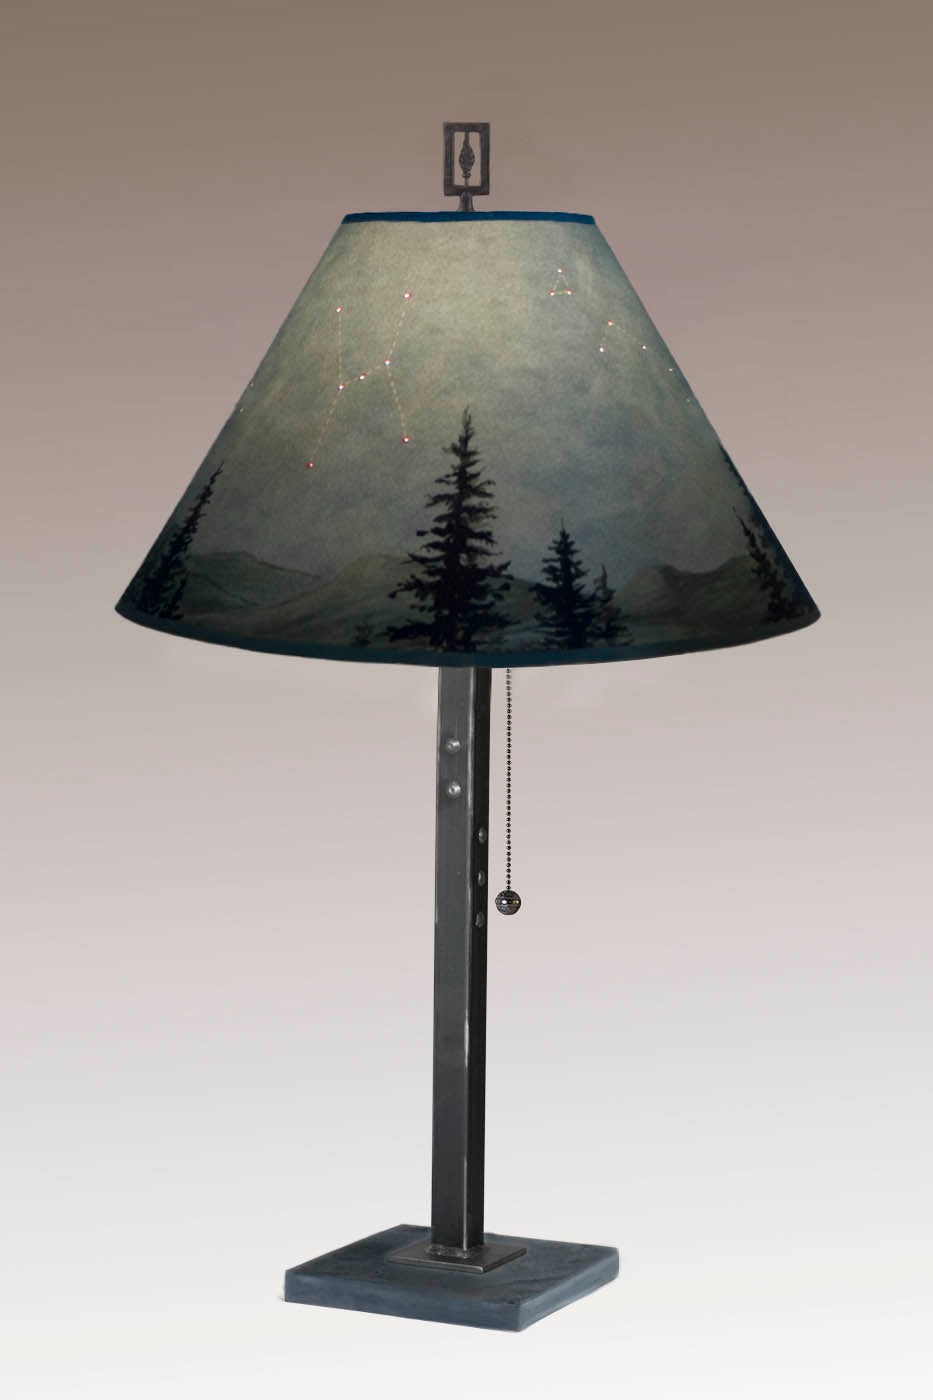 Steel Table Lamp with Medium Conical Shade in Midnight Sky